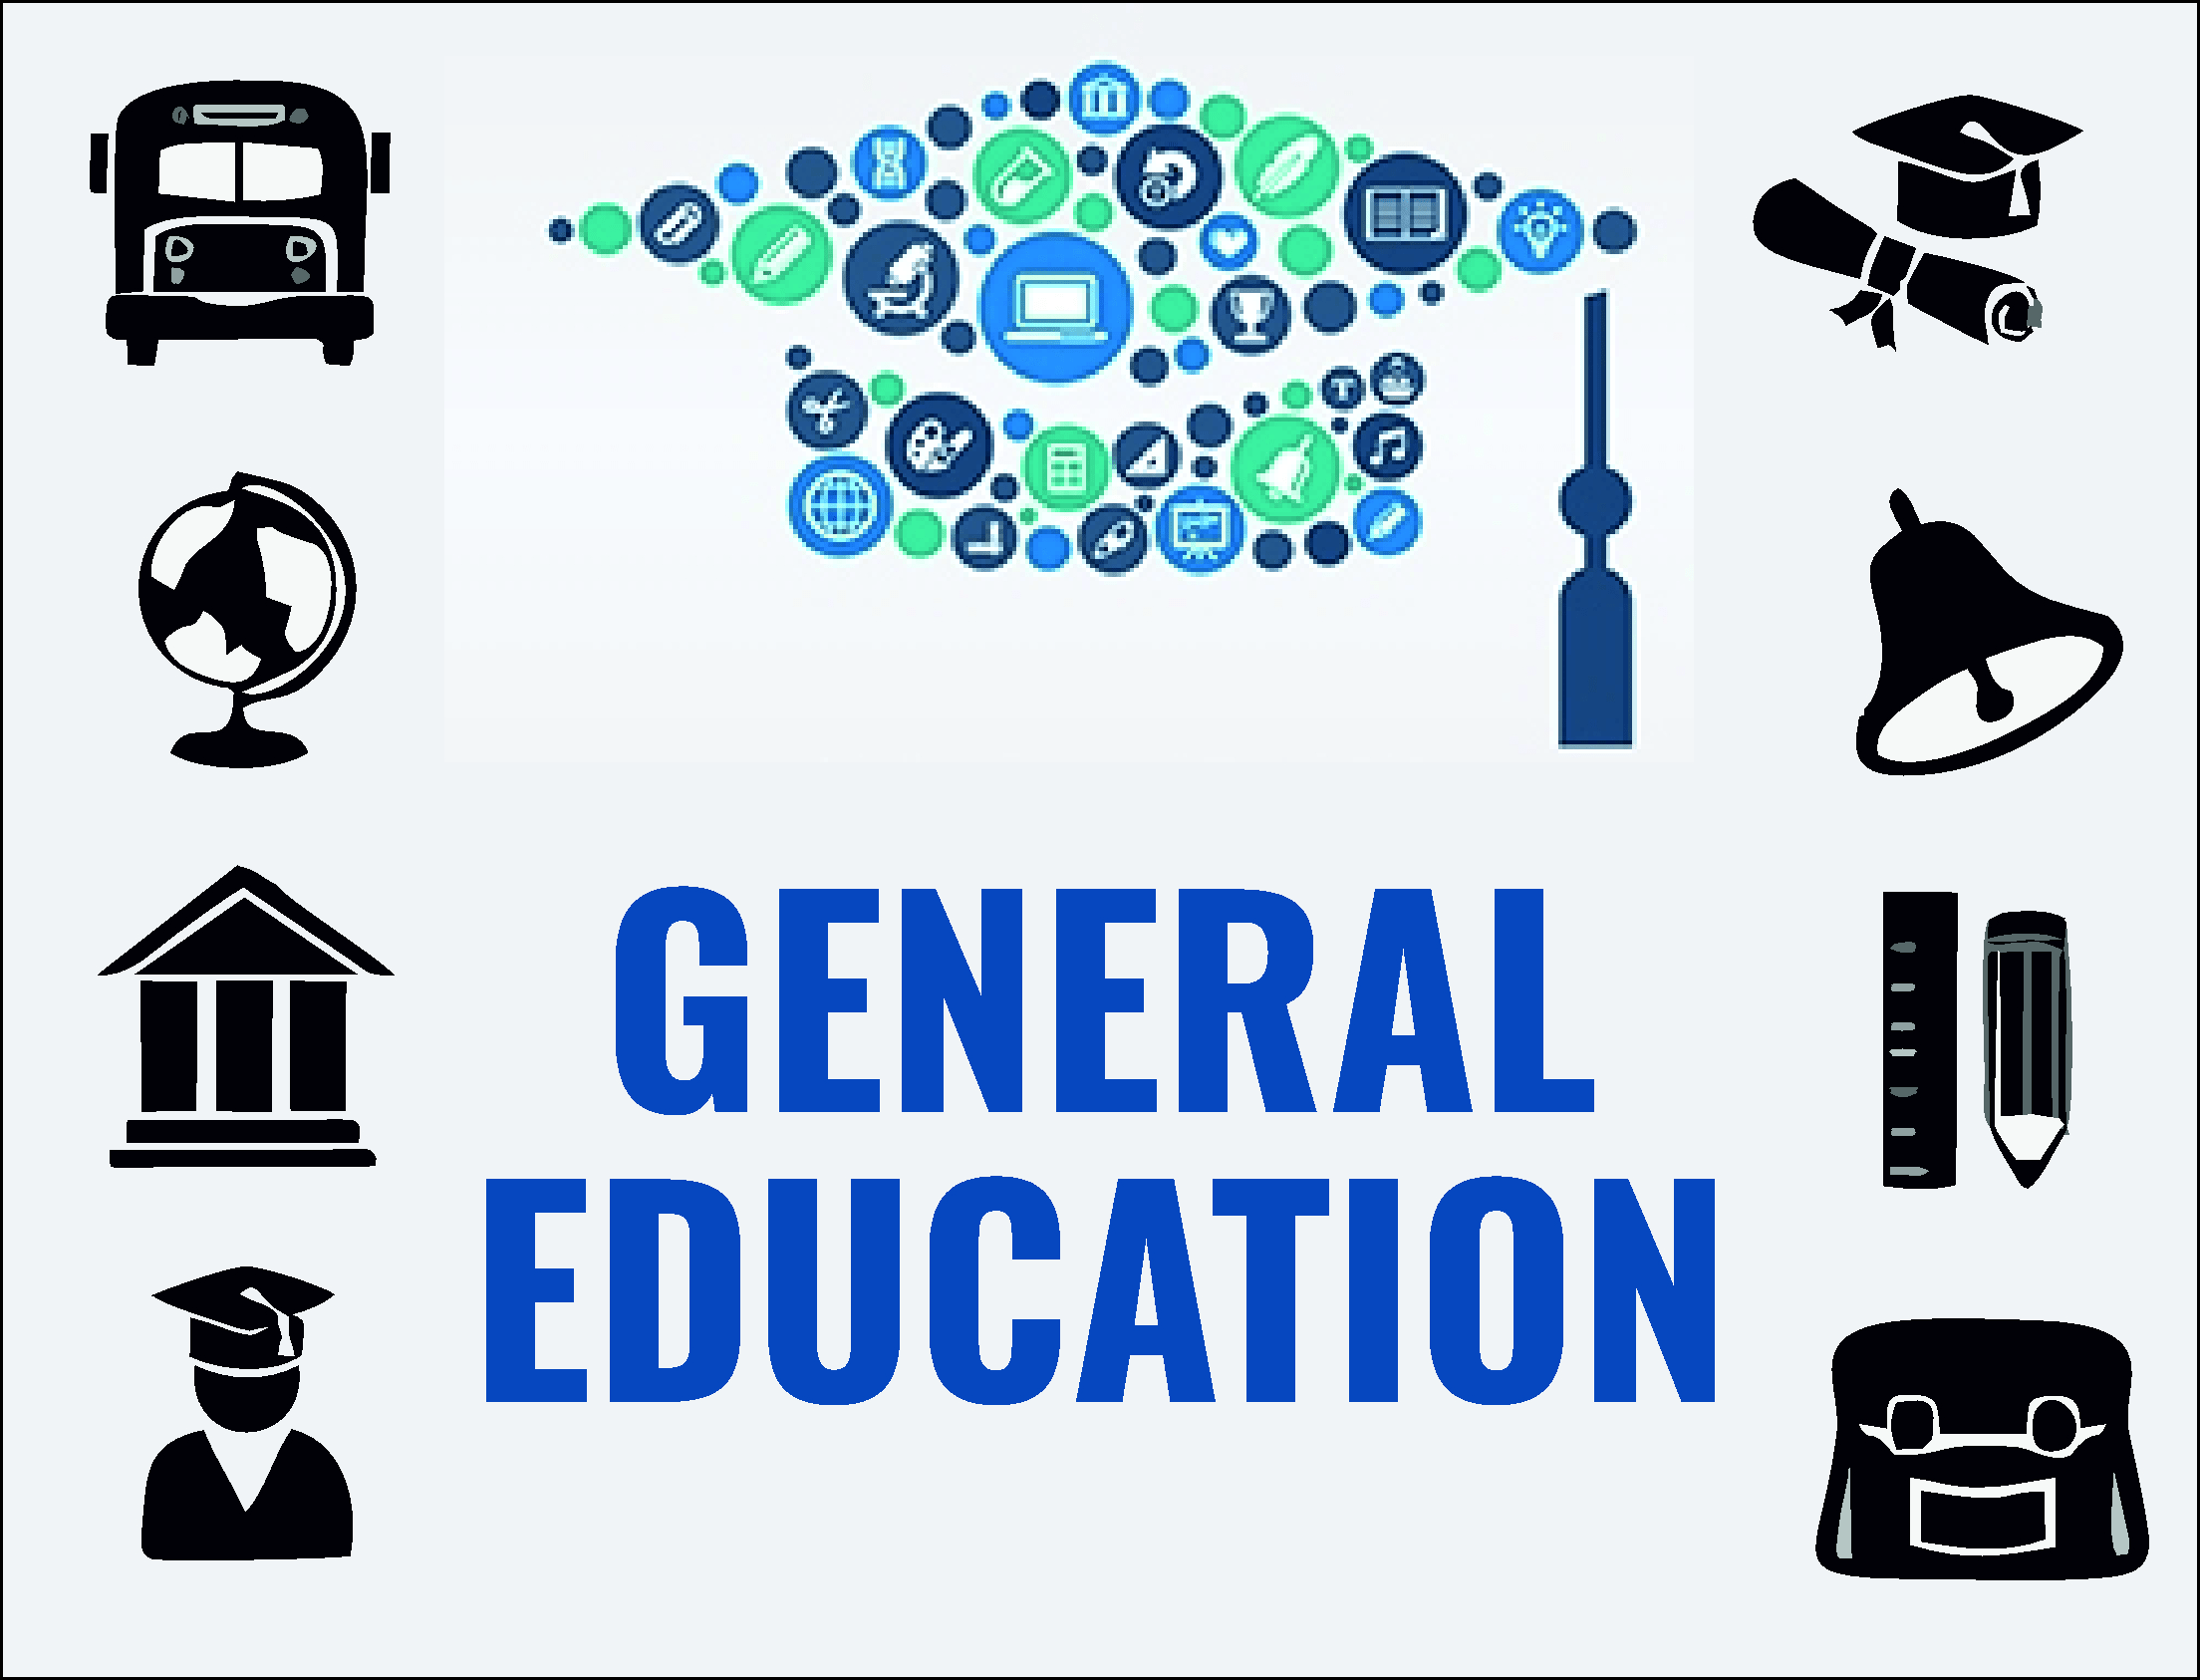 http://study.aisectonline.com/images/SubCategory/GENERAL EDUCATION.png